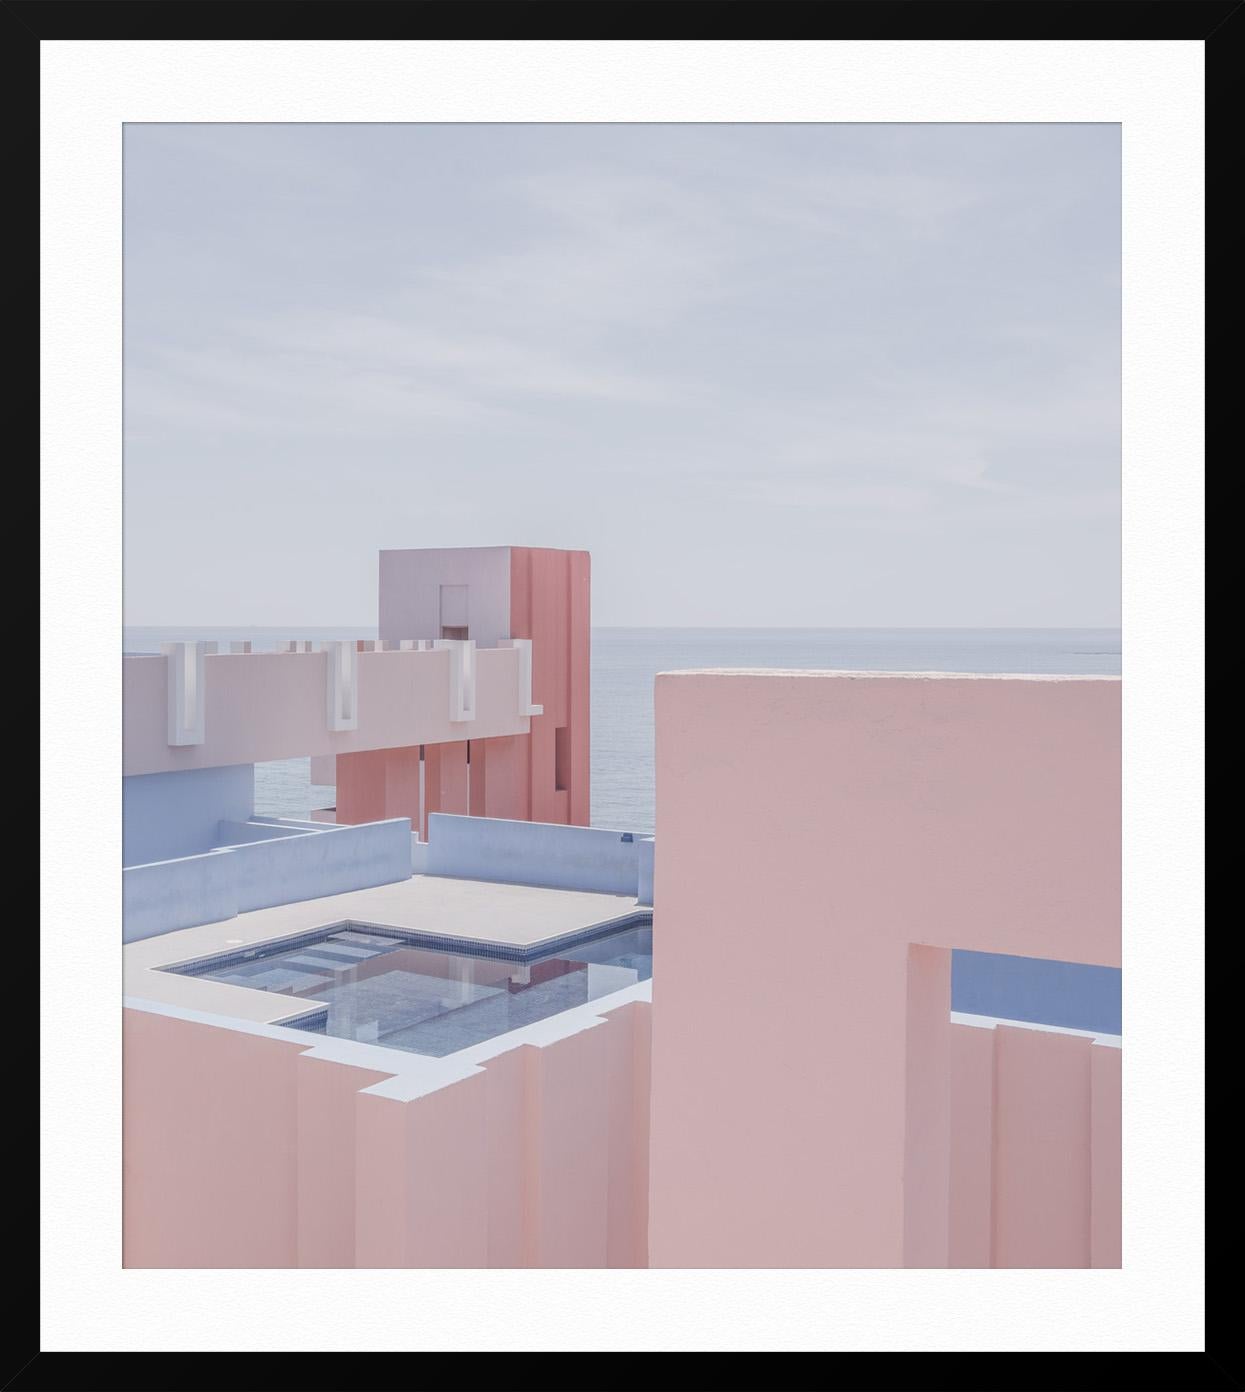 ABOUT THIS PIECE: French photographer Ludwig Favre recently visited La Muralla Roja in Calpe, Spain. His pictures of architecture carry the same romantic feel of a Parisian shooting exotic landscapes. Favre is know for his soft Palette, interesting